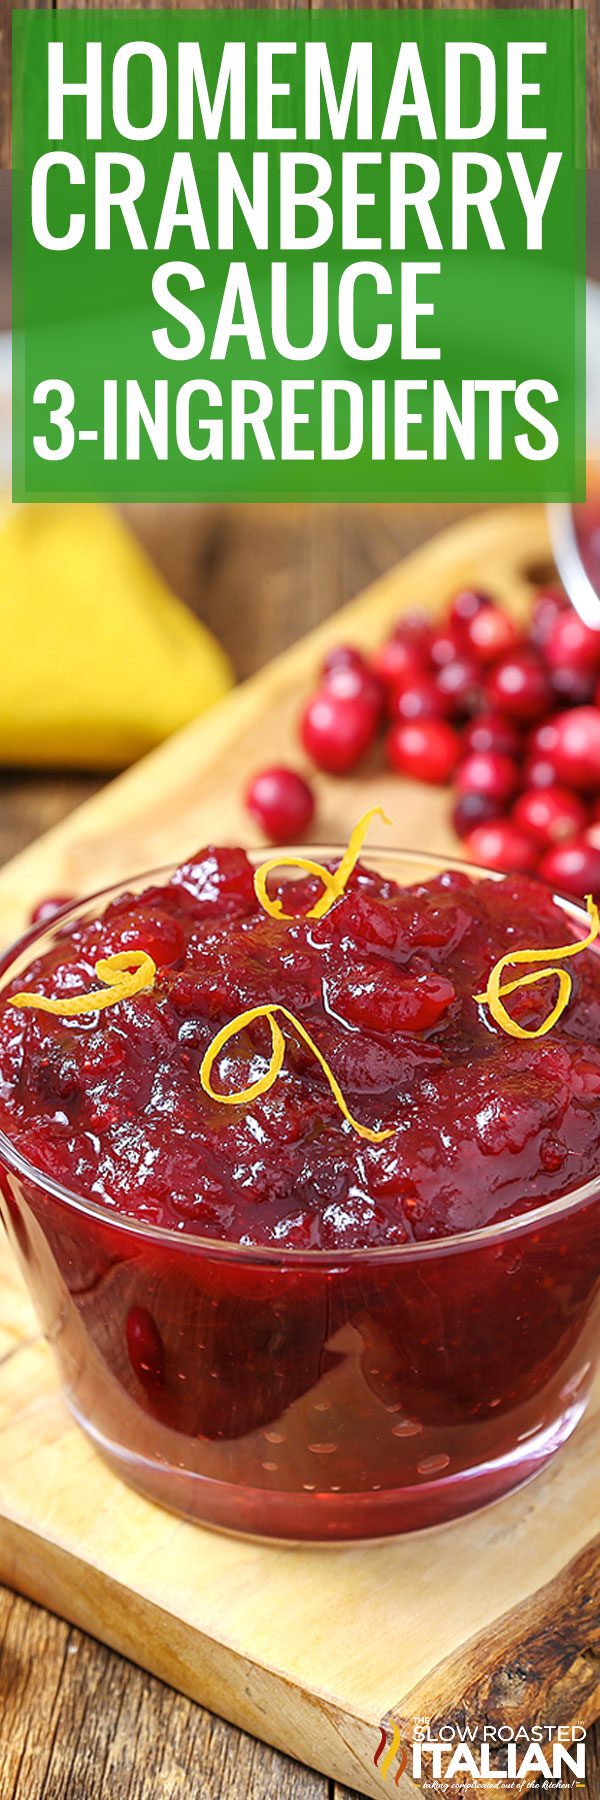 titled image (and shown): homemade cranberry sauce 